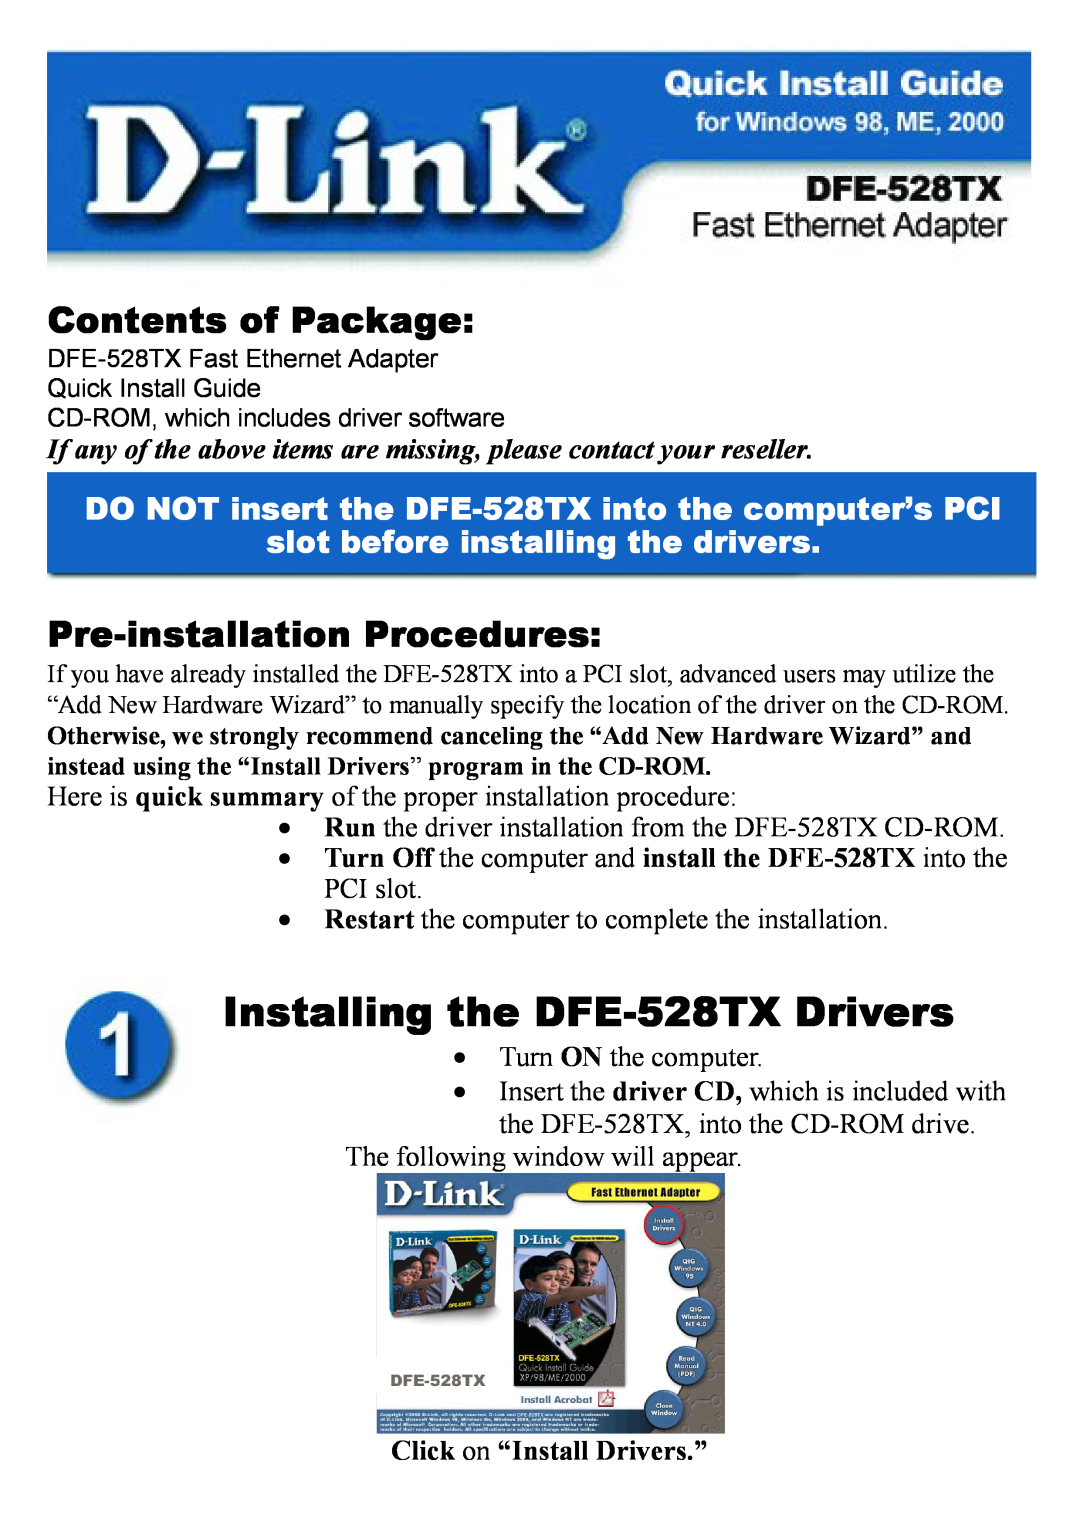 D-Link manual Installing the DFE-528TX Drivers, If any of the above items are missing, please contact your reseller 